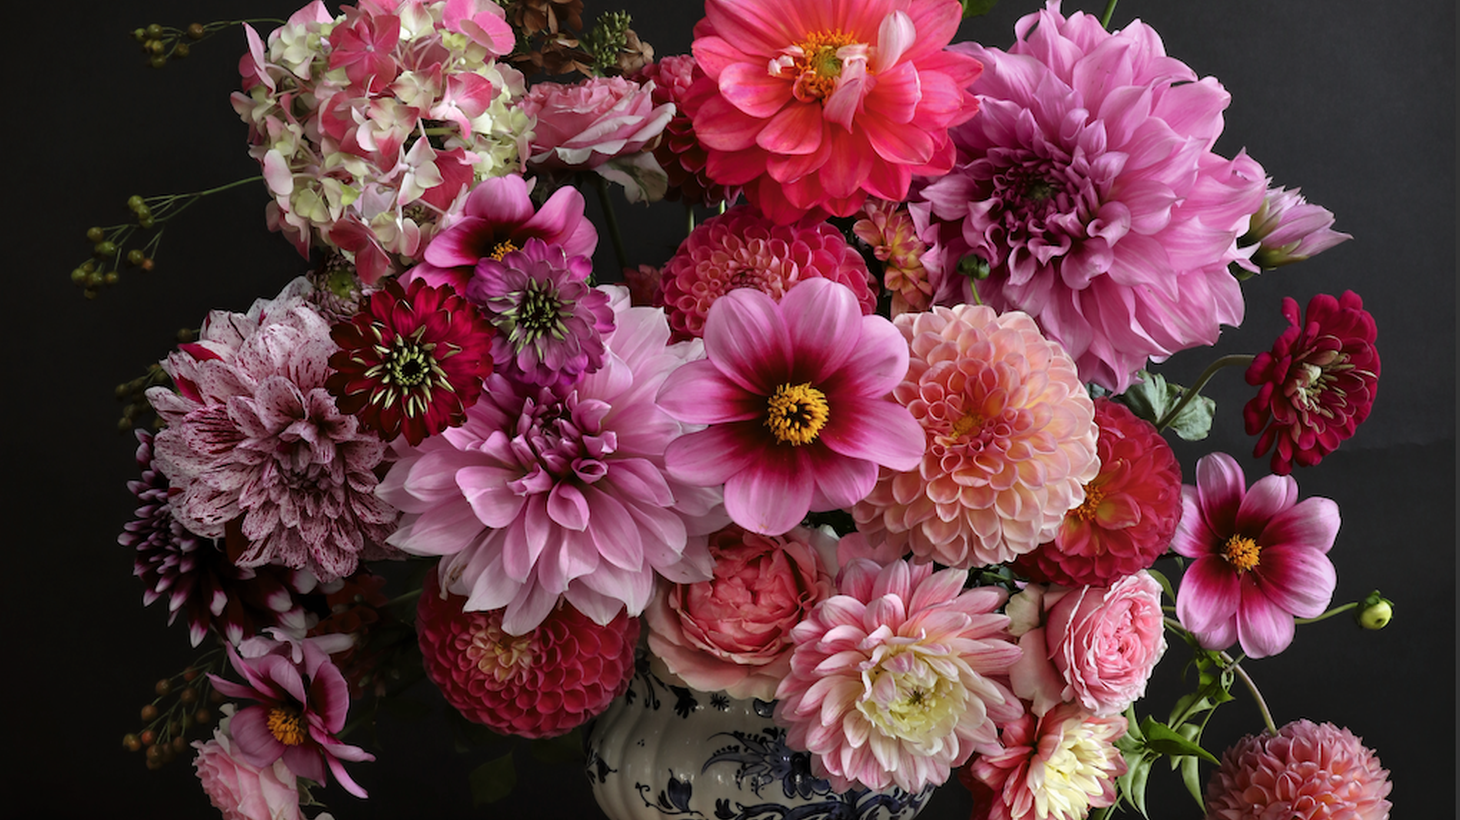 One of the gorgeous floral arrangements in "A Sweet Floral Life."